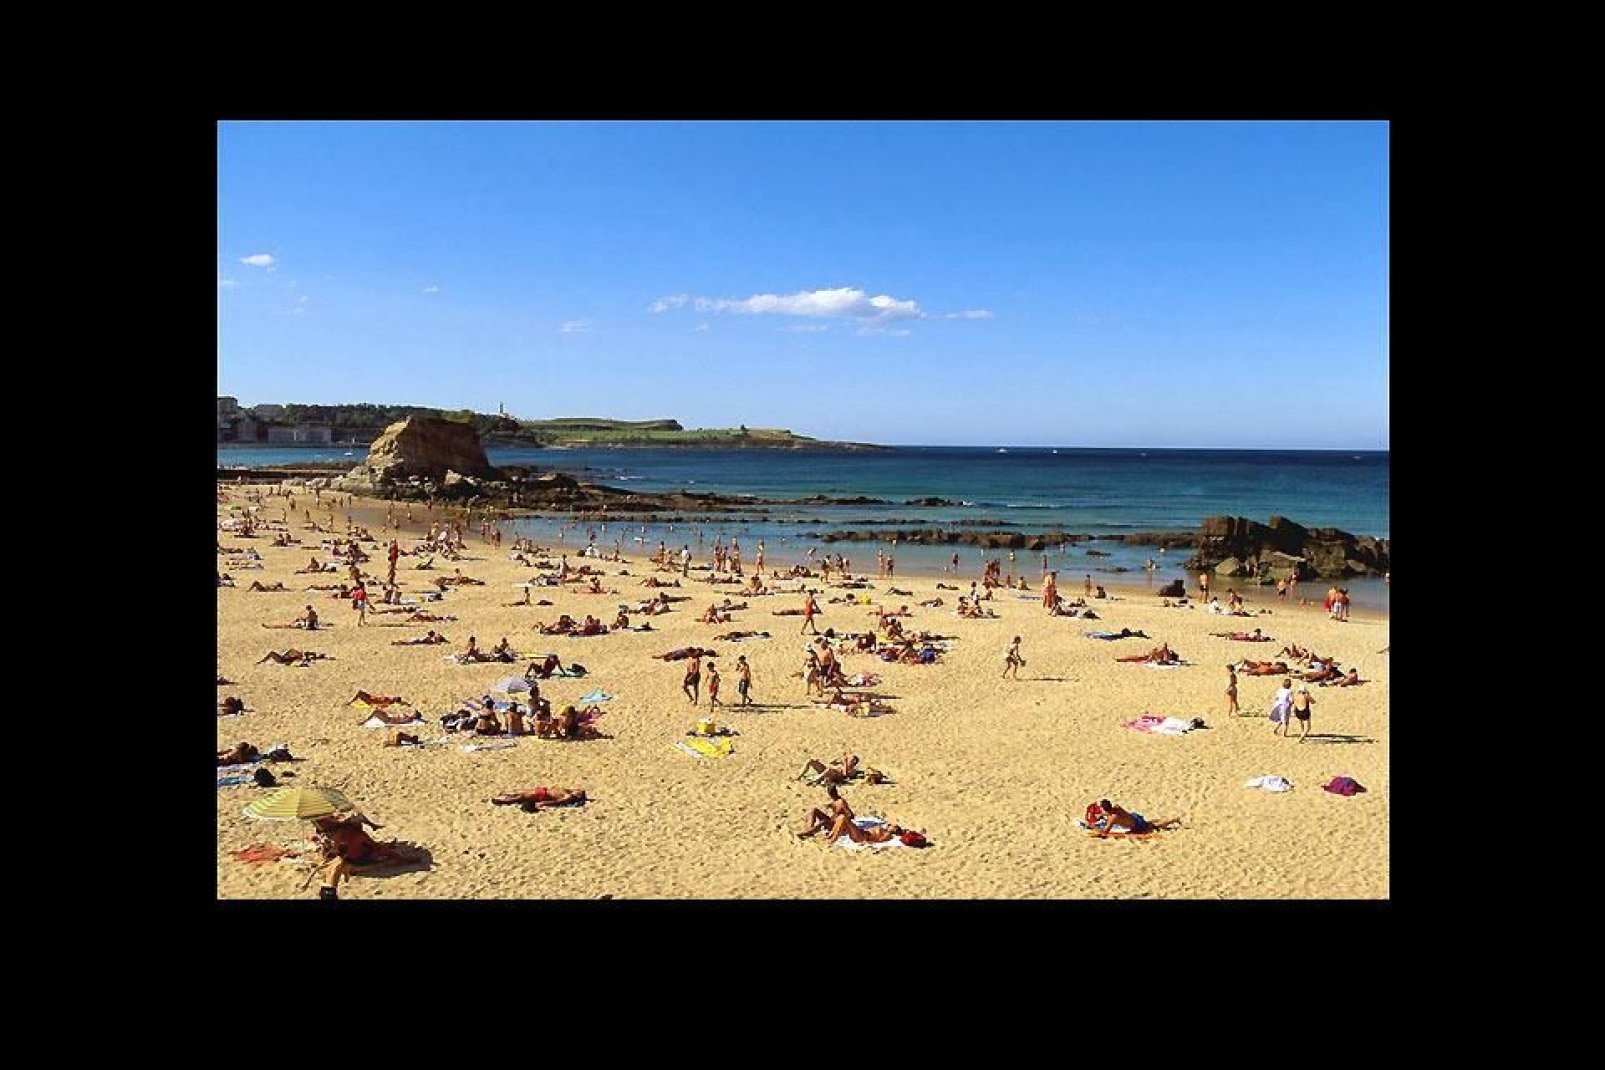 The beach of El Camello is 200 metres long and 50 metres wide, attarcting a large number of visitors.